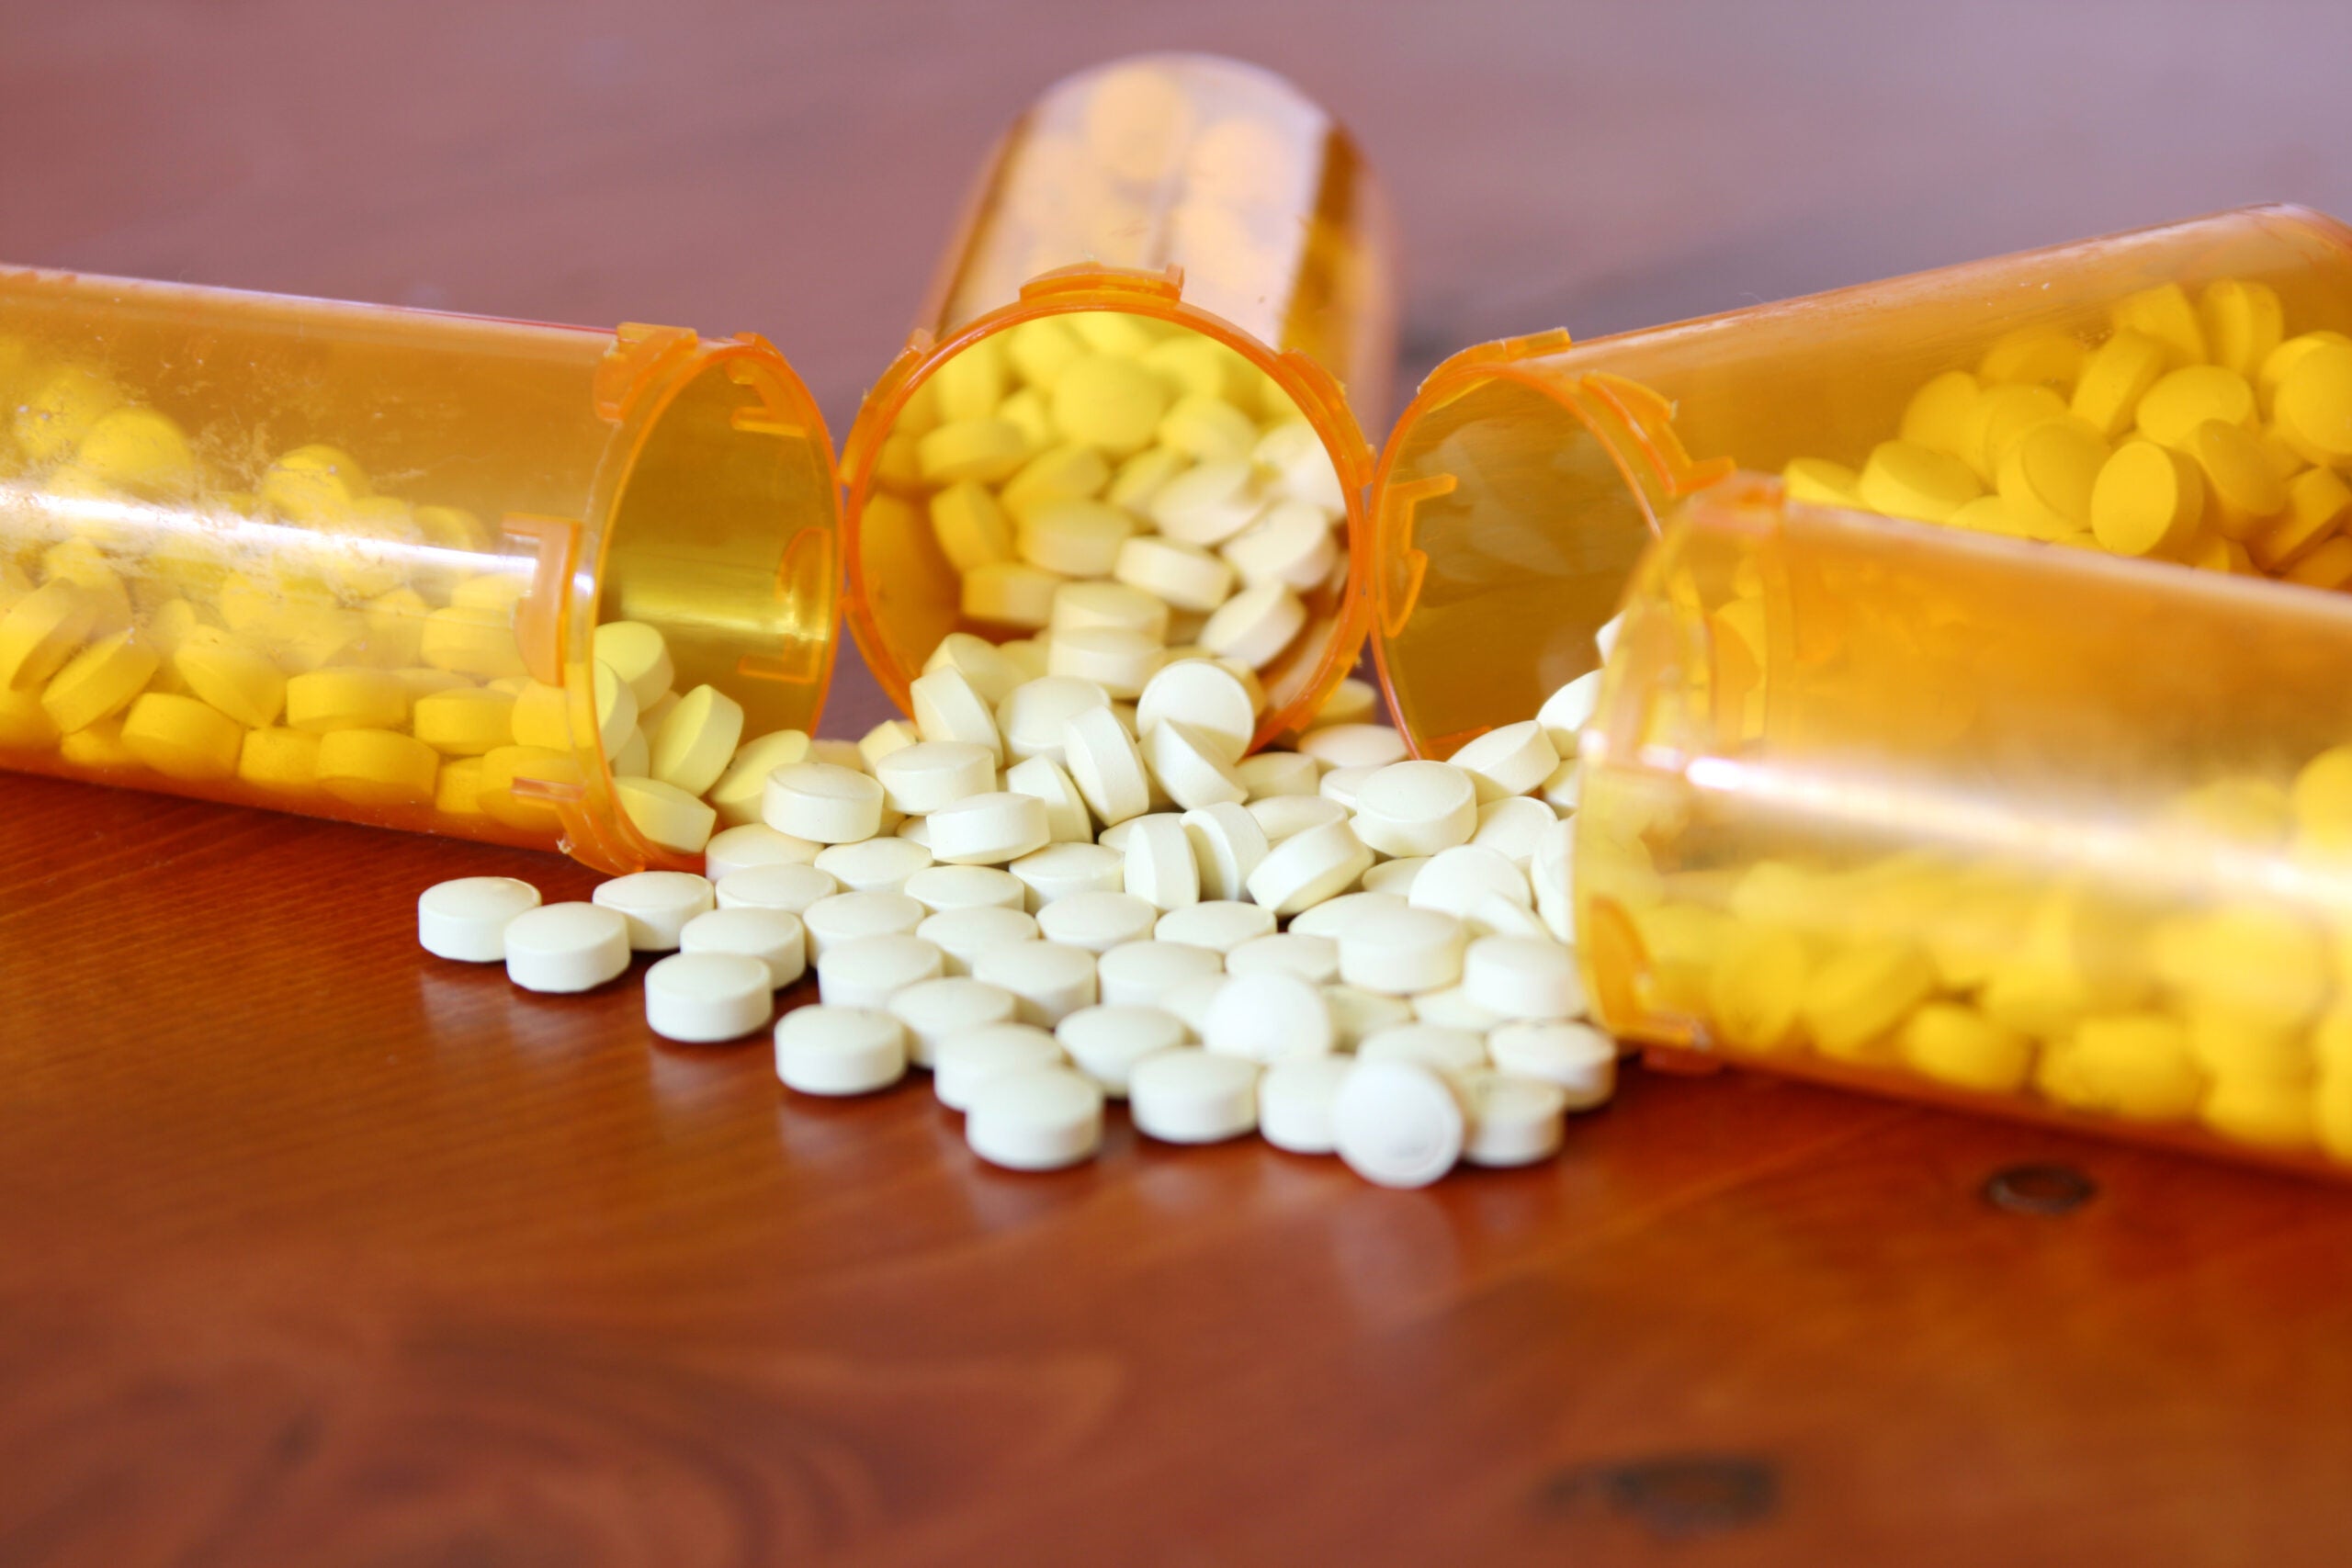 Is it safe to take expired medication? | Popular Science